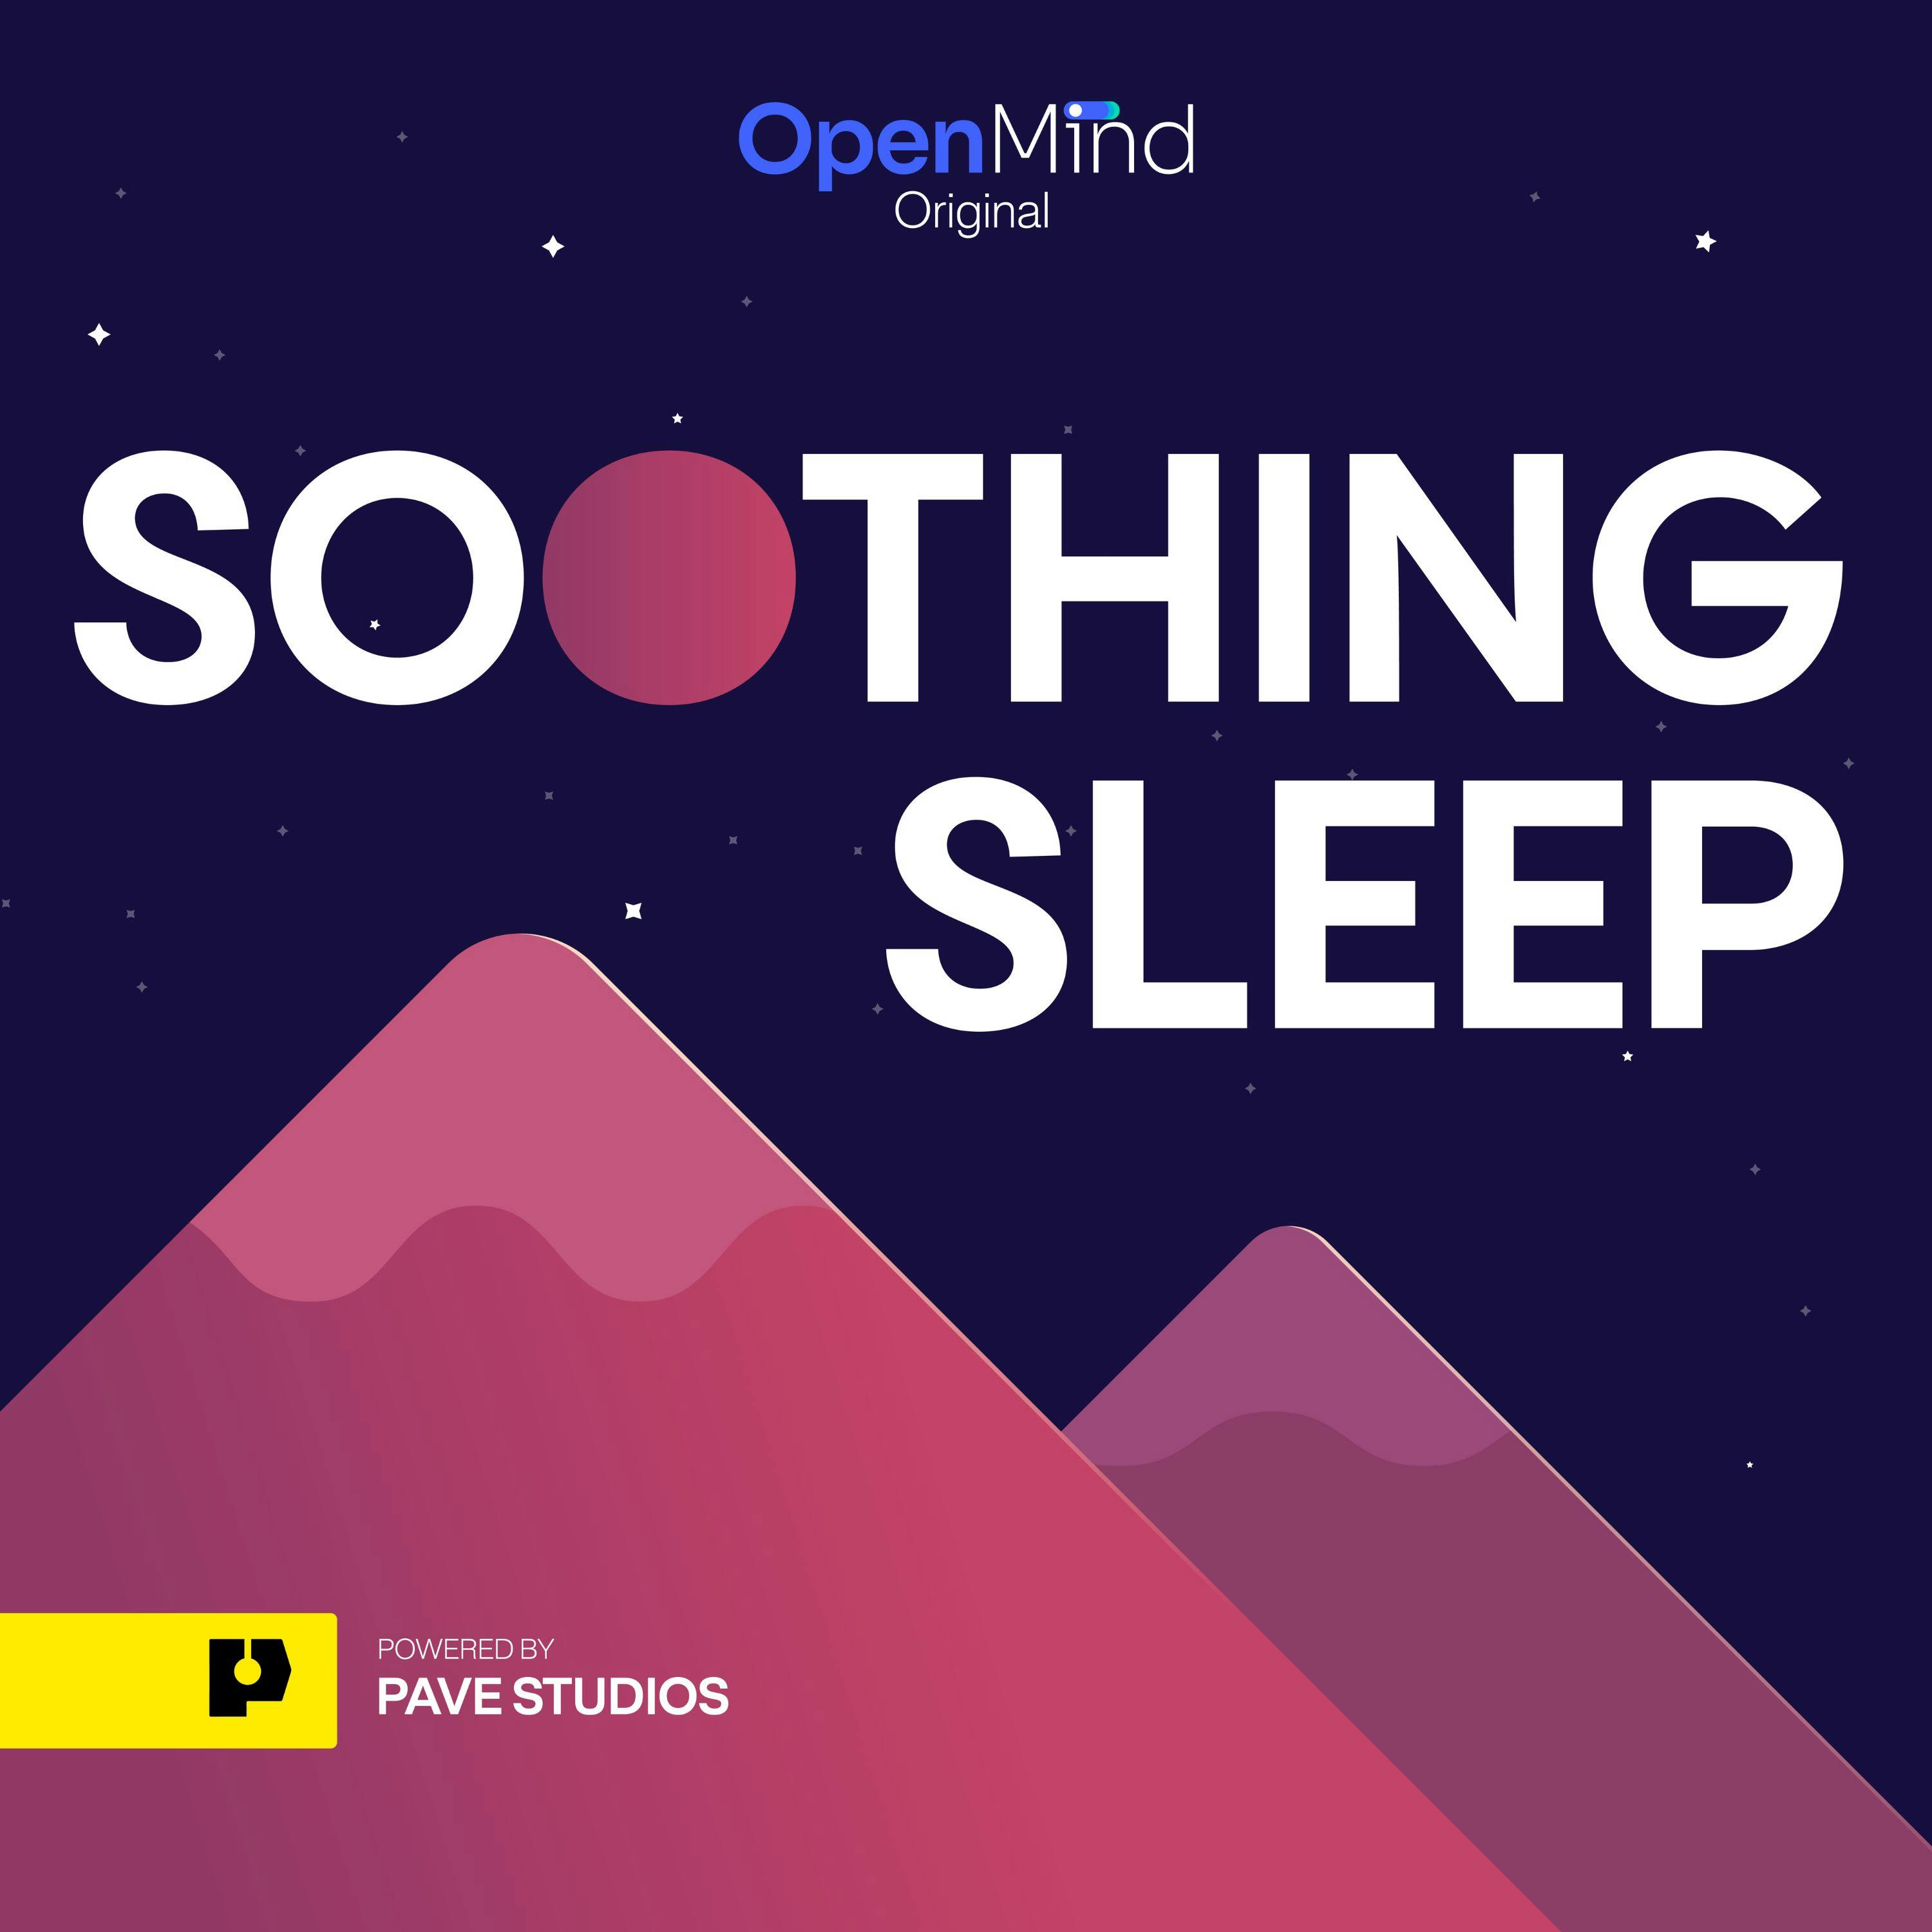 You Might Also Like: Soothing Sleep